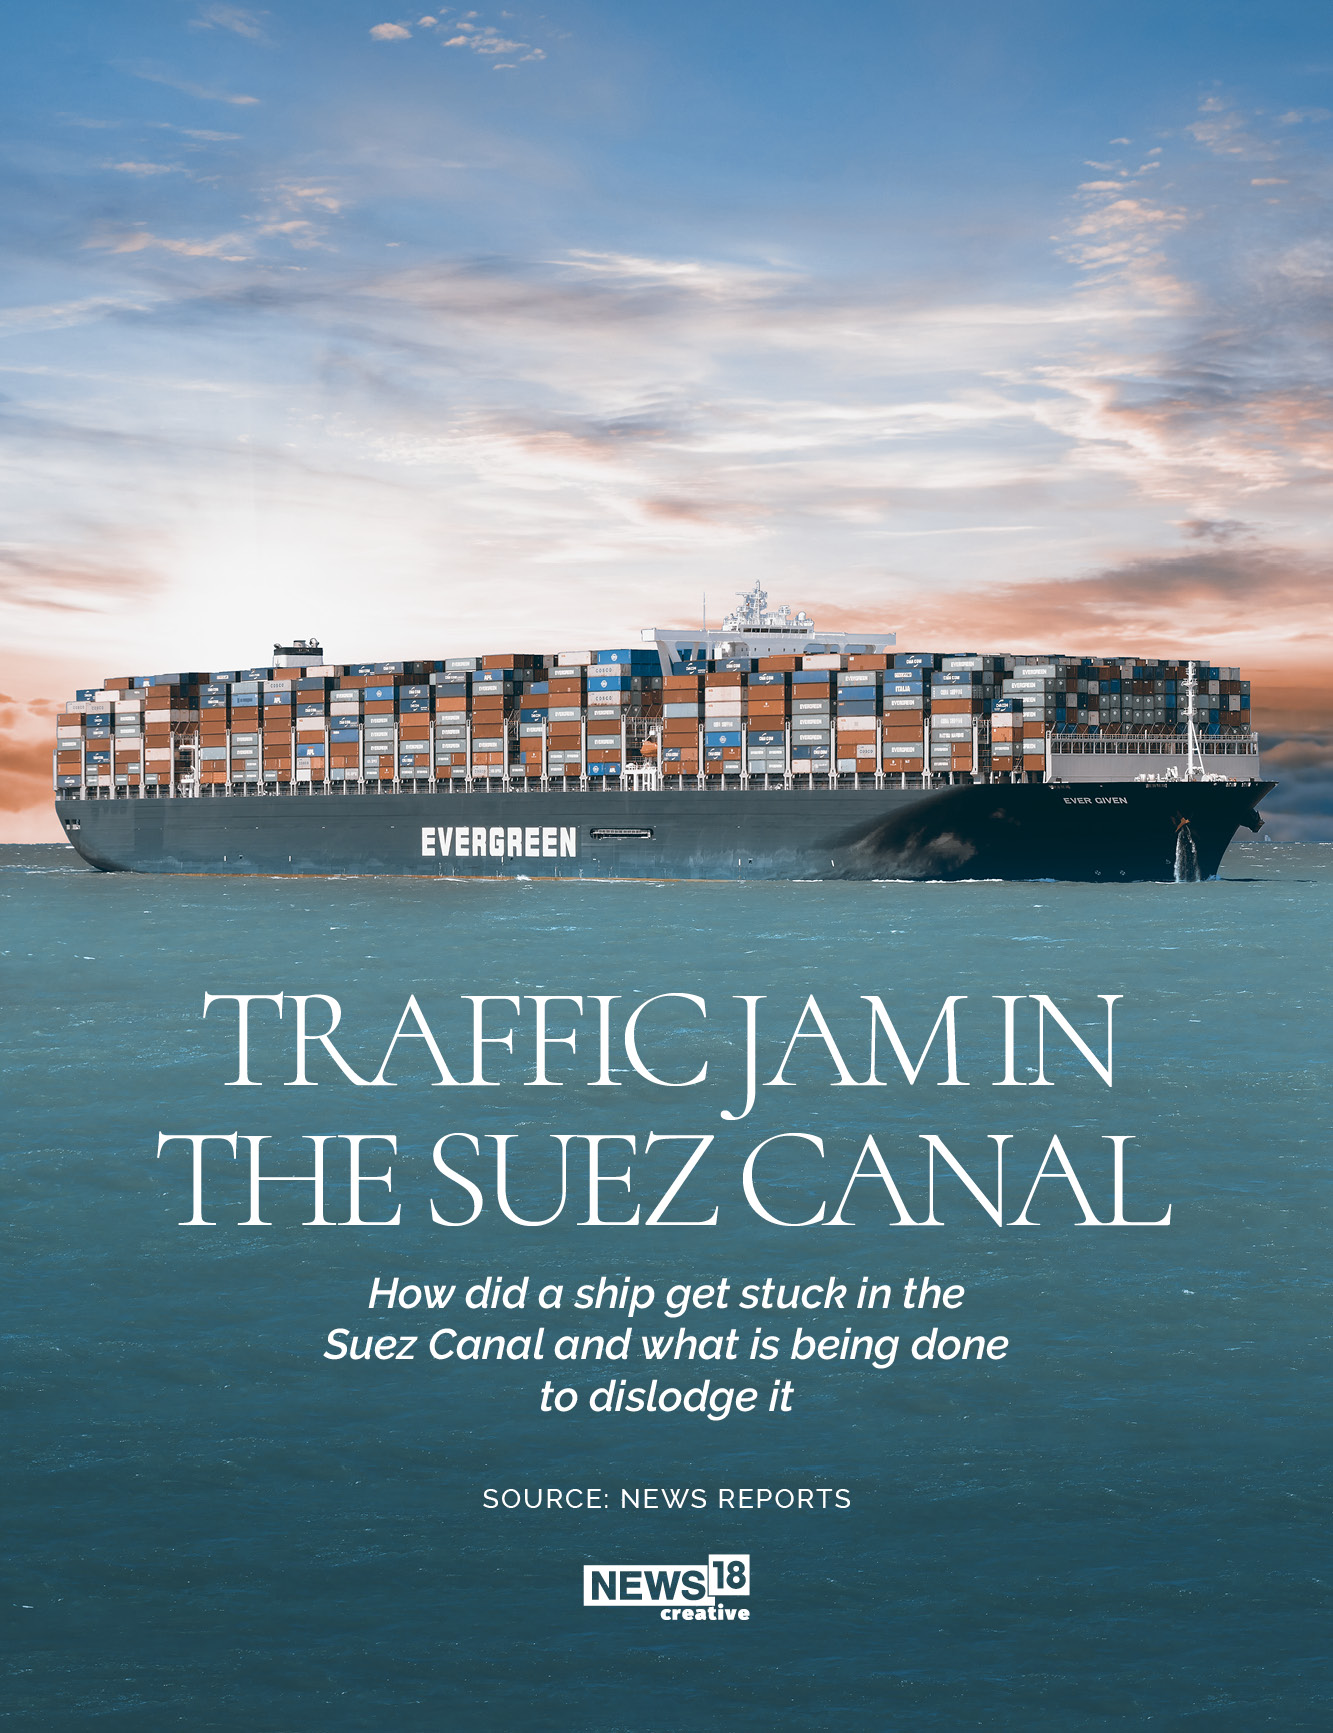 How did a ship get stuck in Suez Canal?